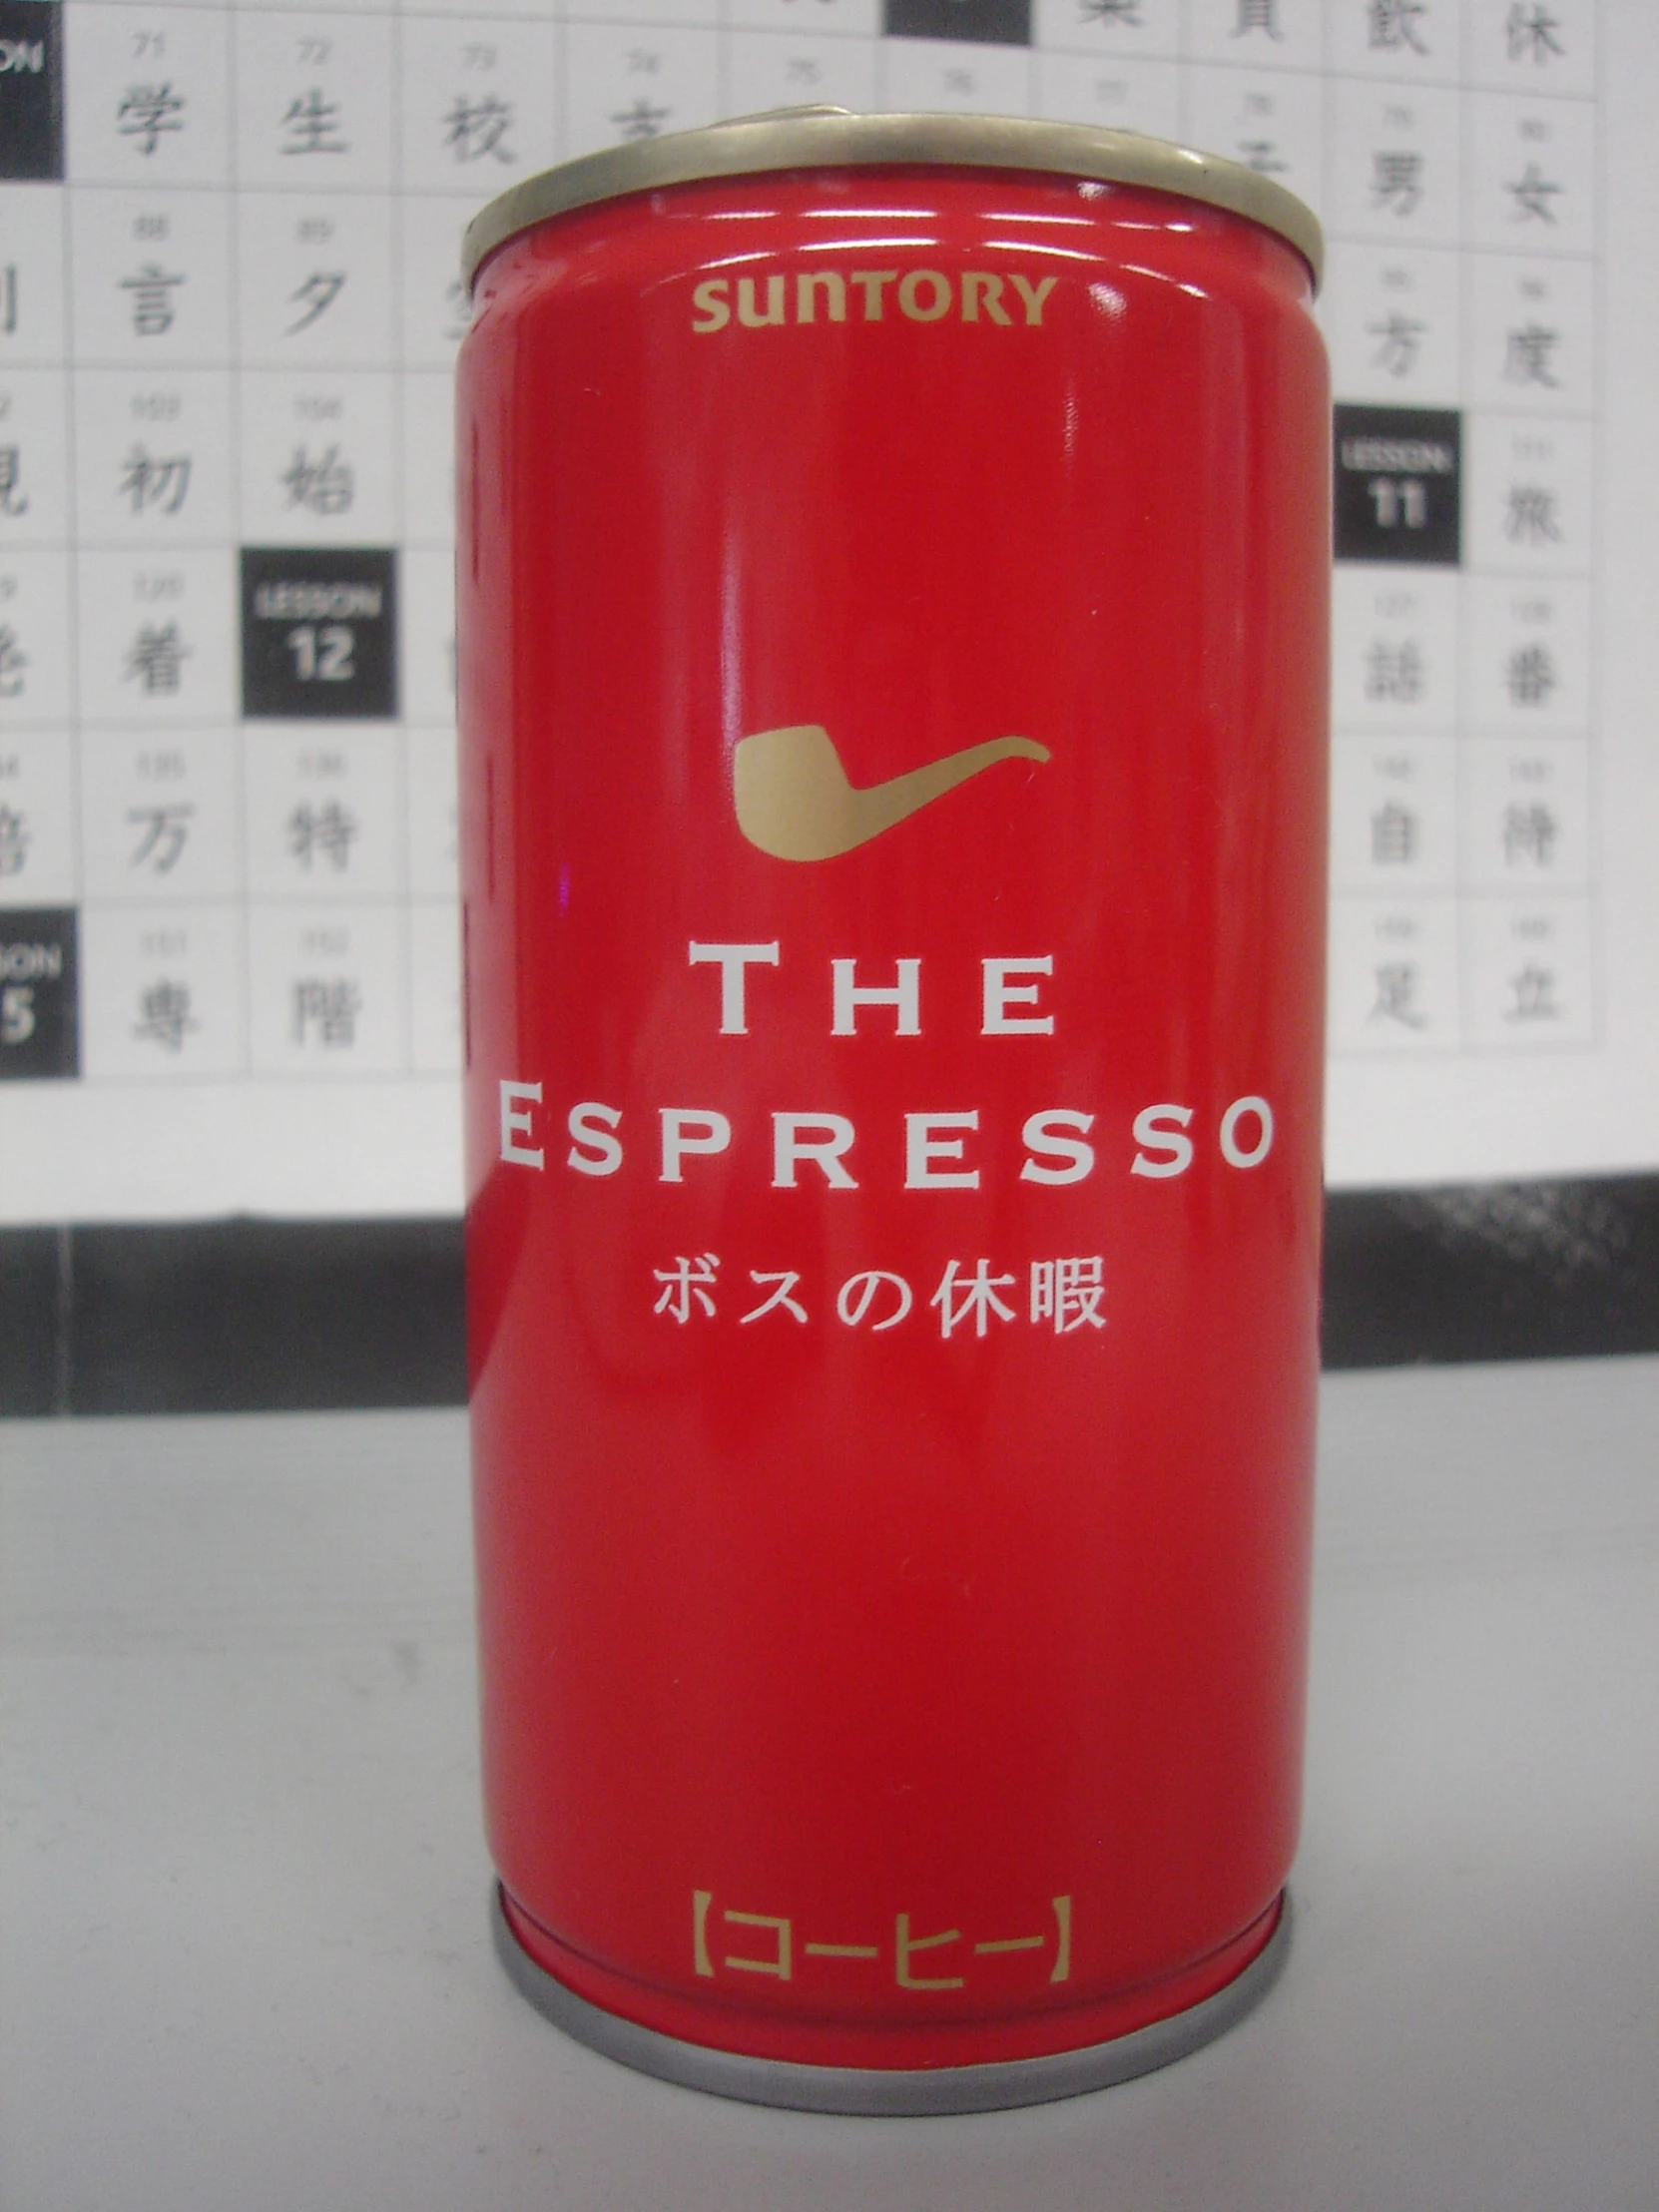 a can of suntoryy the espresso is on a table